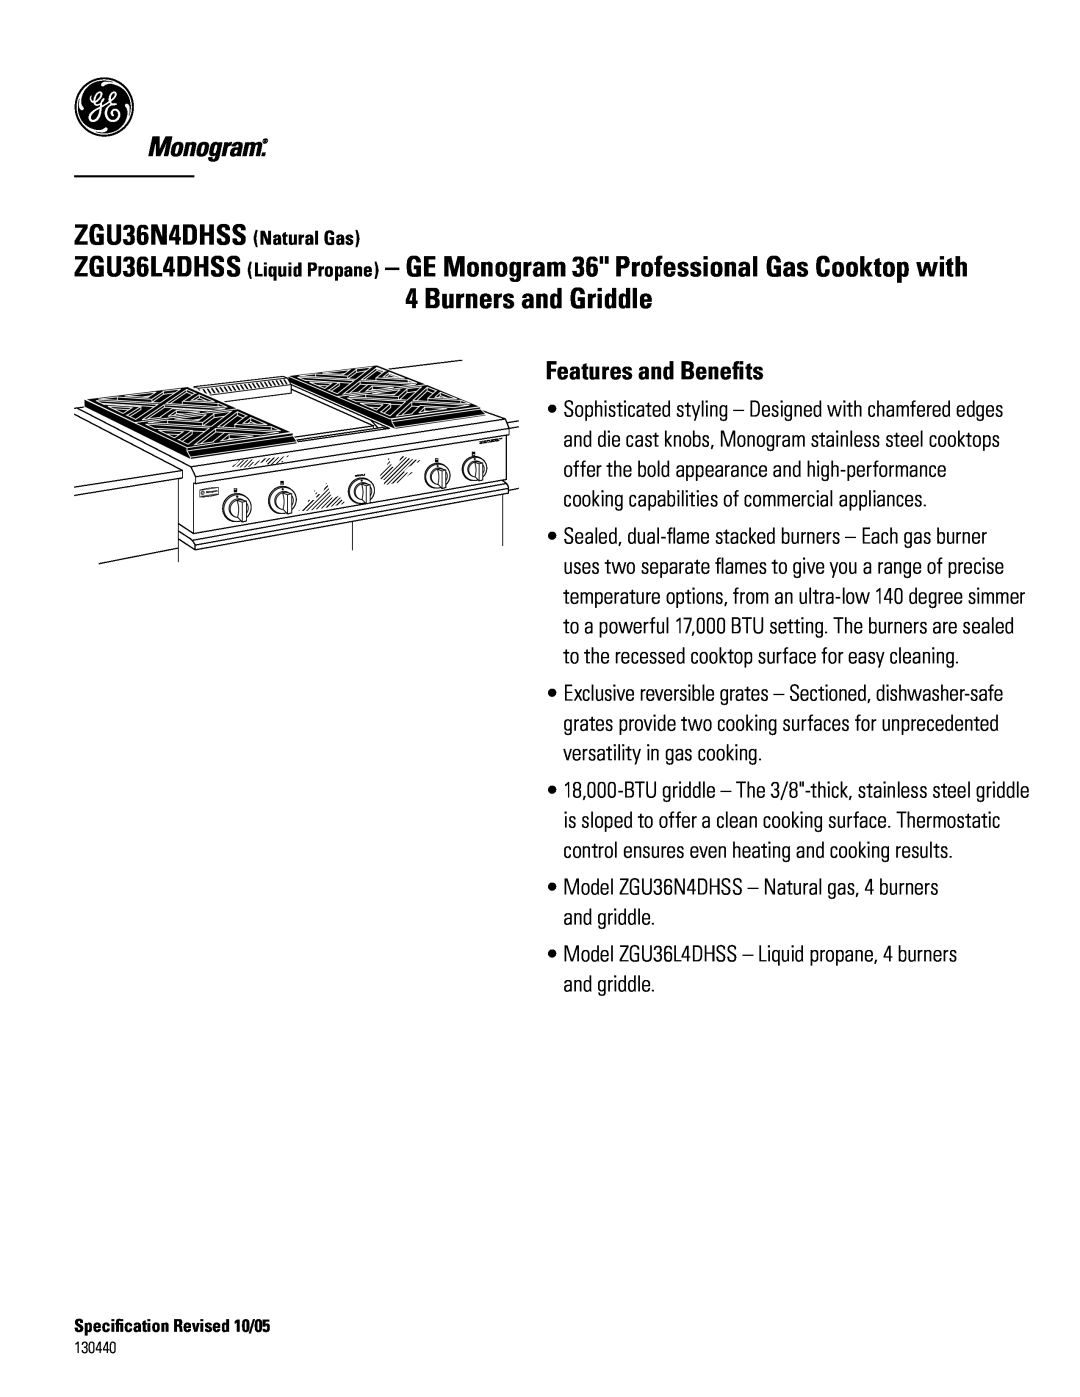 GE Monogram dimensions Burners and Griddle, Features and Beneﬁts, Model ZGU36N4DHSS - Natural gas, 4 burners and griddle 